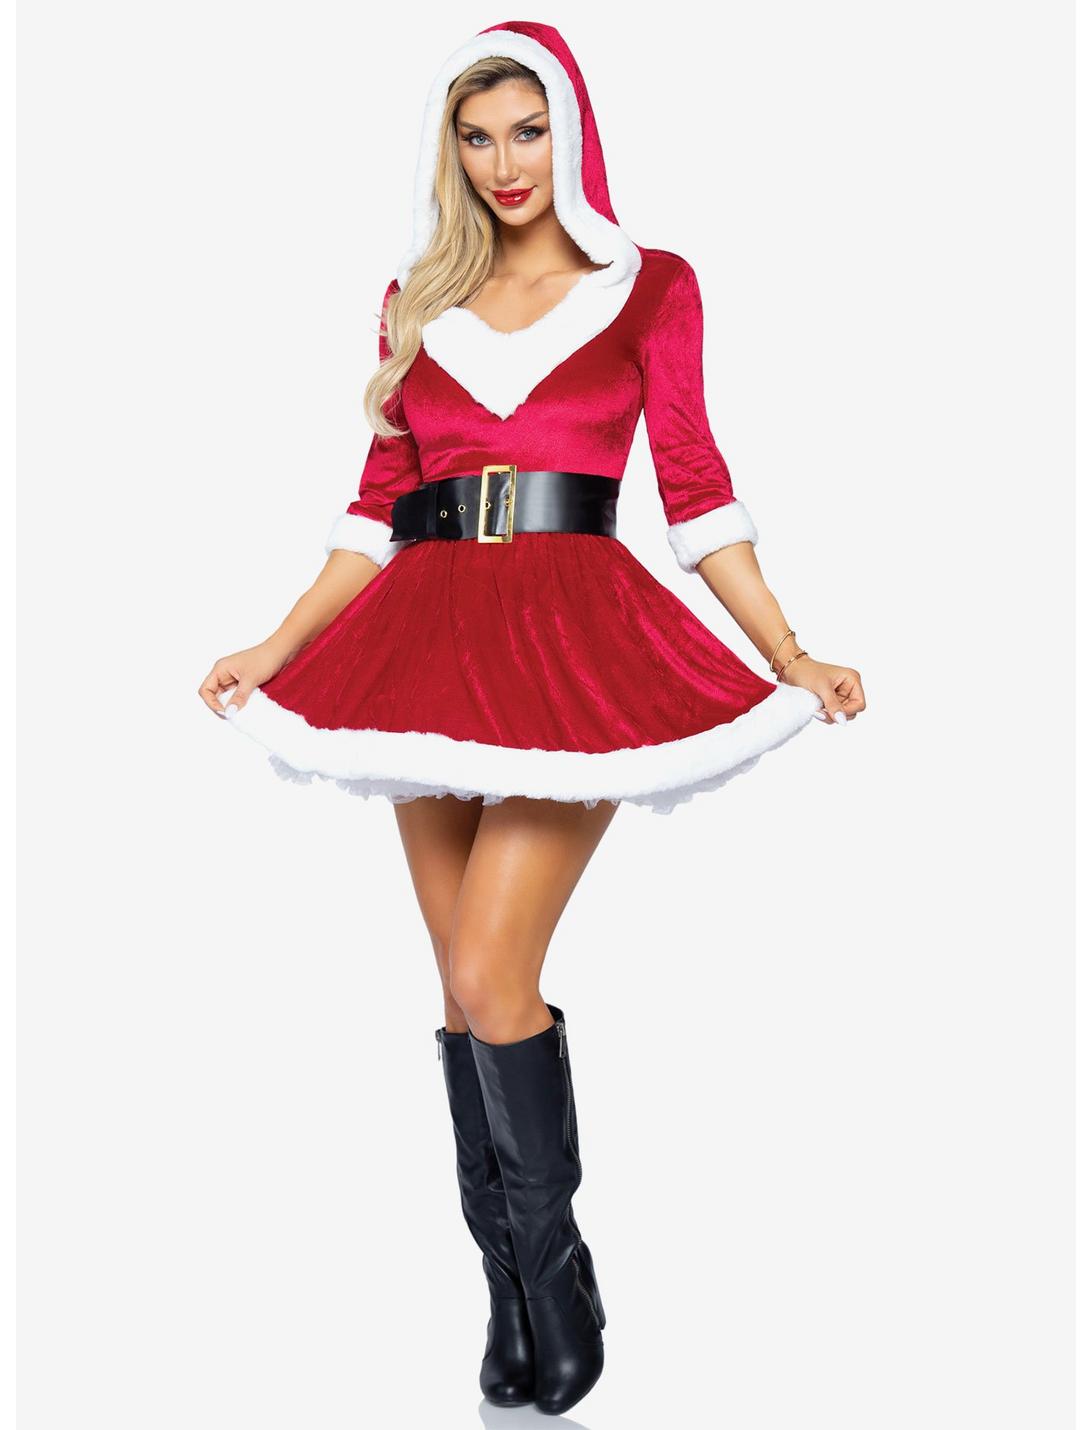 Mrs. Claus Costume Velvet Hooded Dress with Belt Red, RED, hi-res